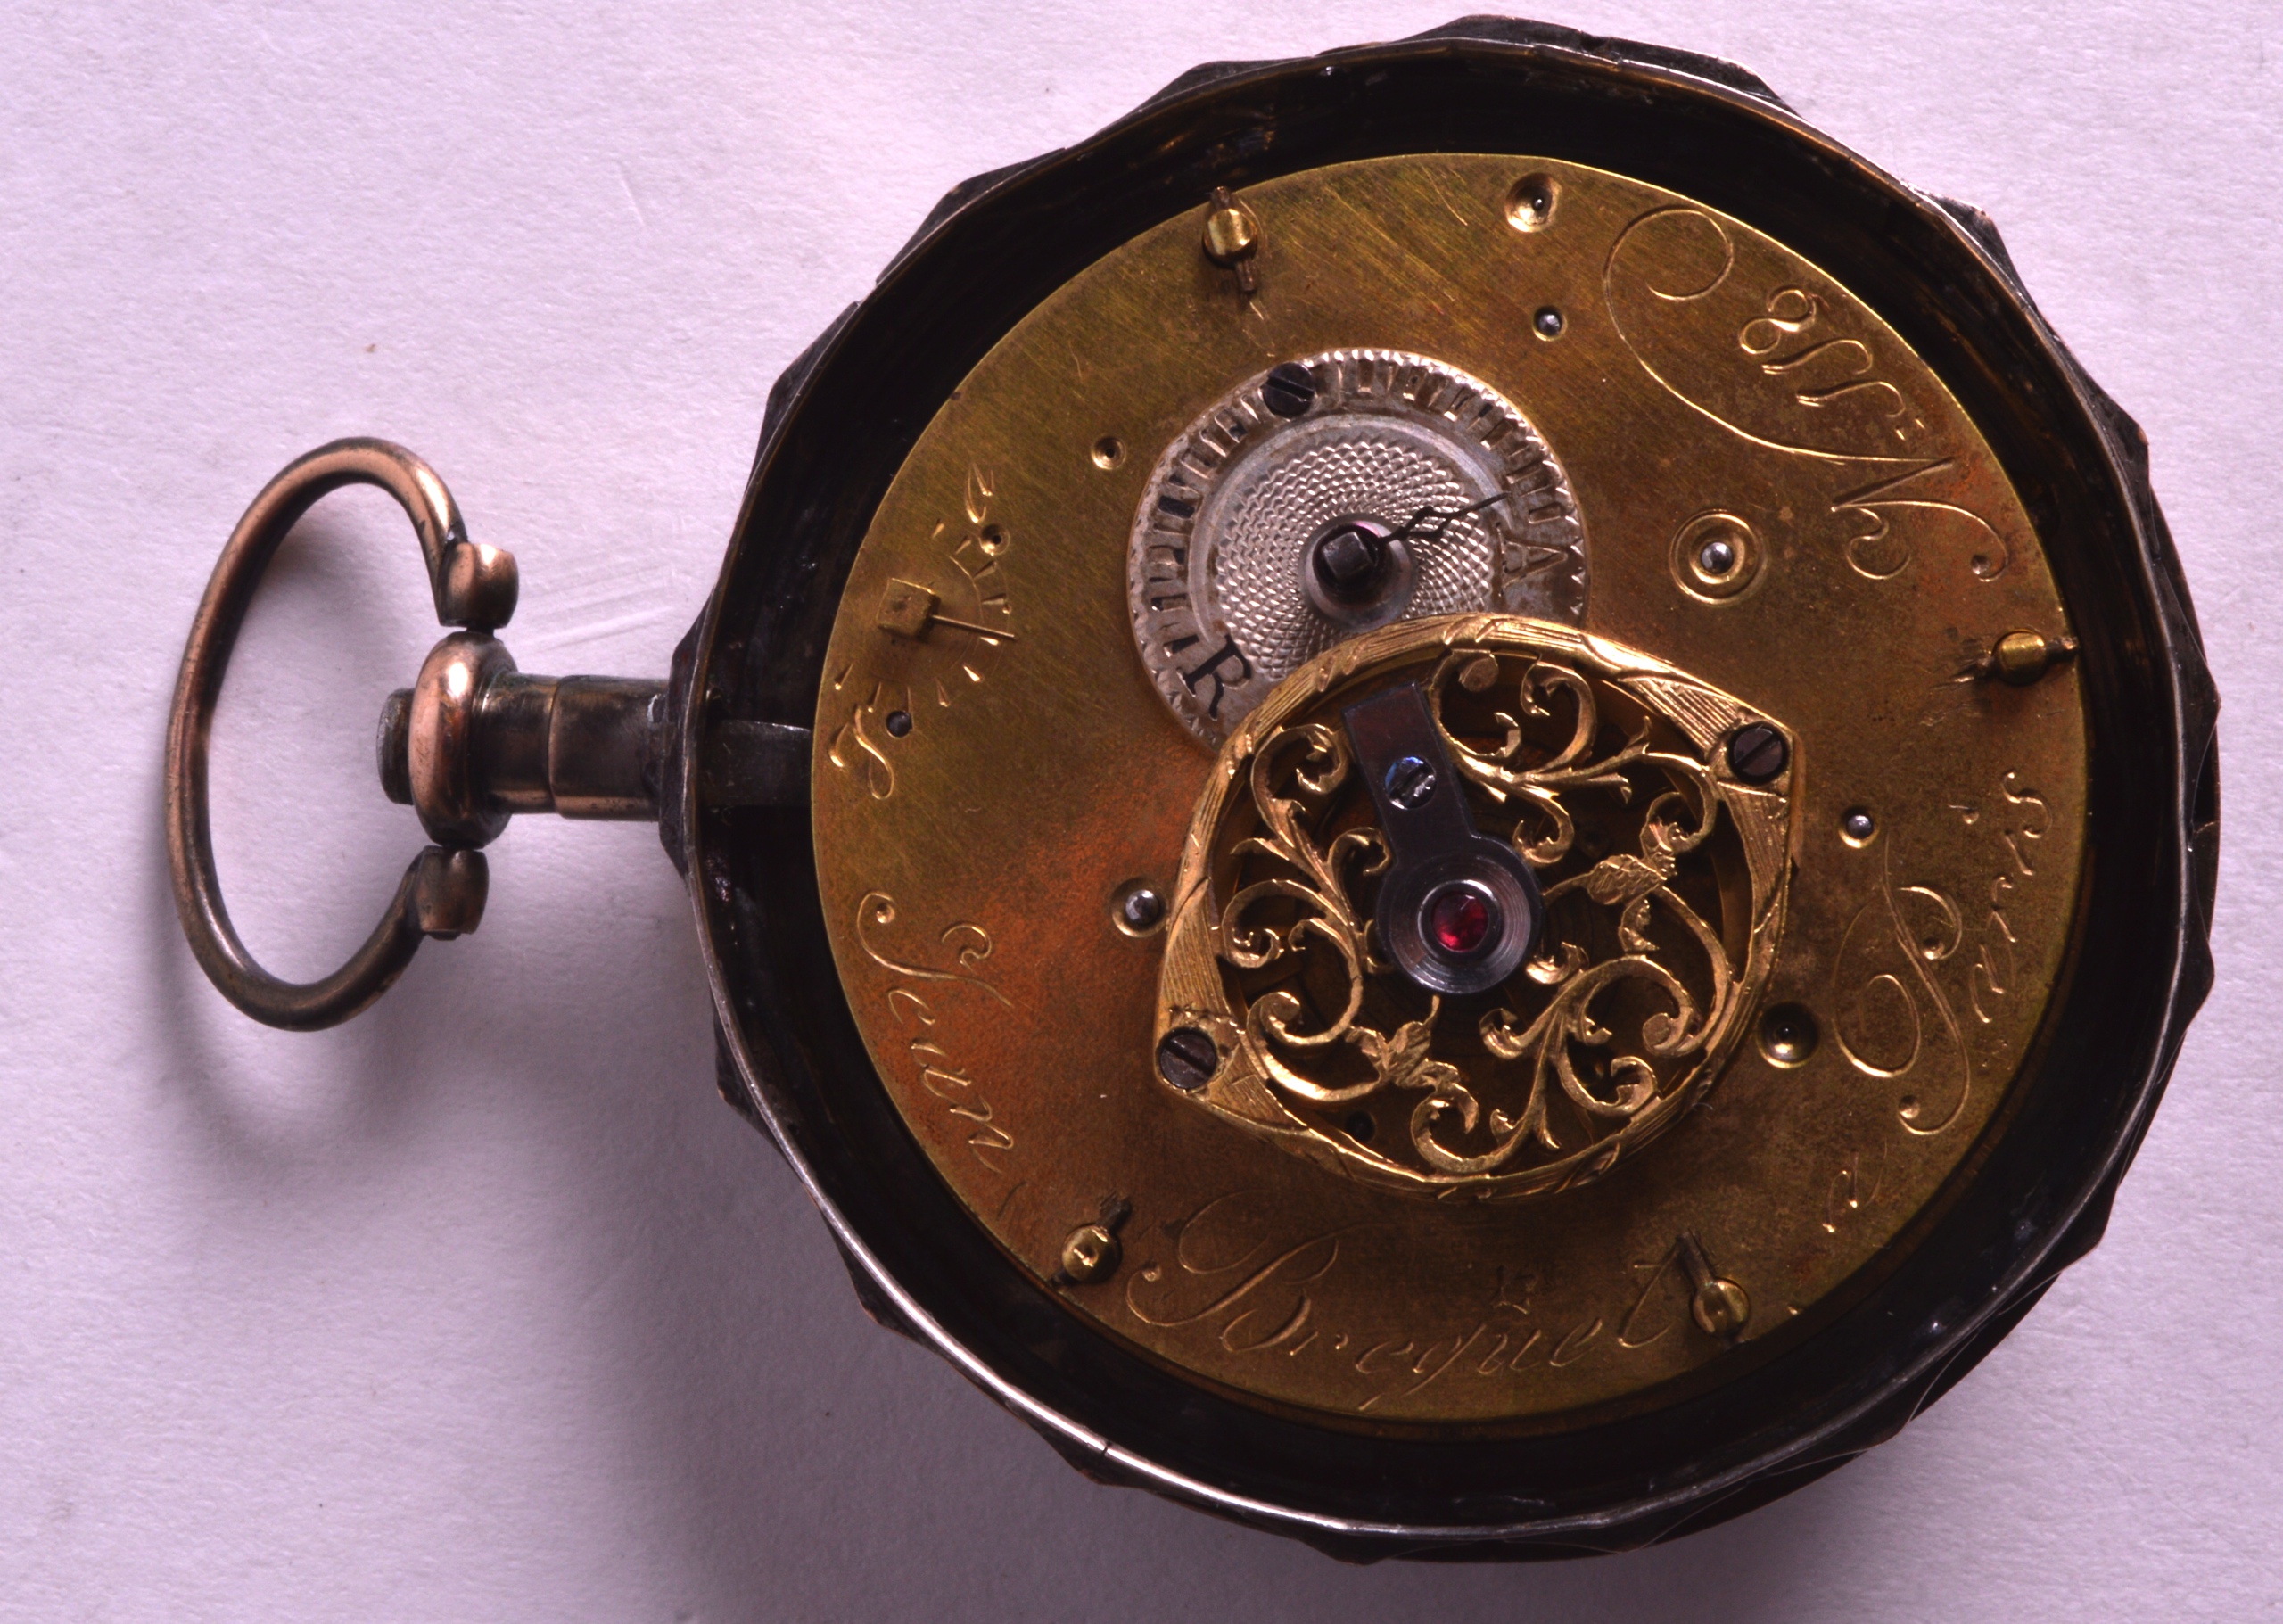 AN 18TH/19TH CENTURY SILVER BREGUET REPEATING POCKET WATCH with white enamel dial and black - Image 3 of 3